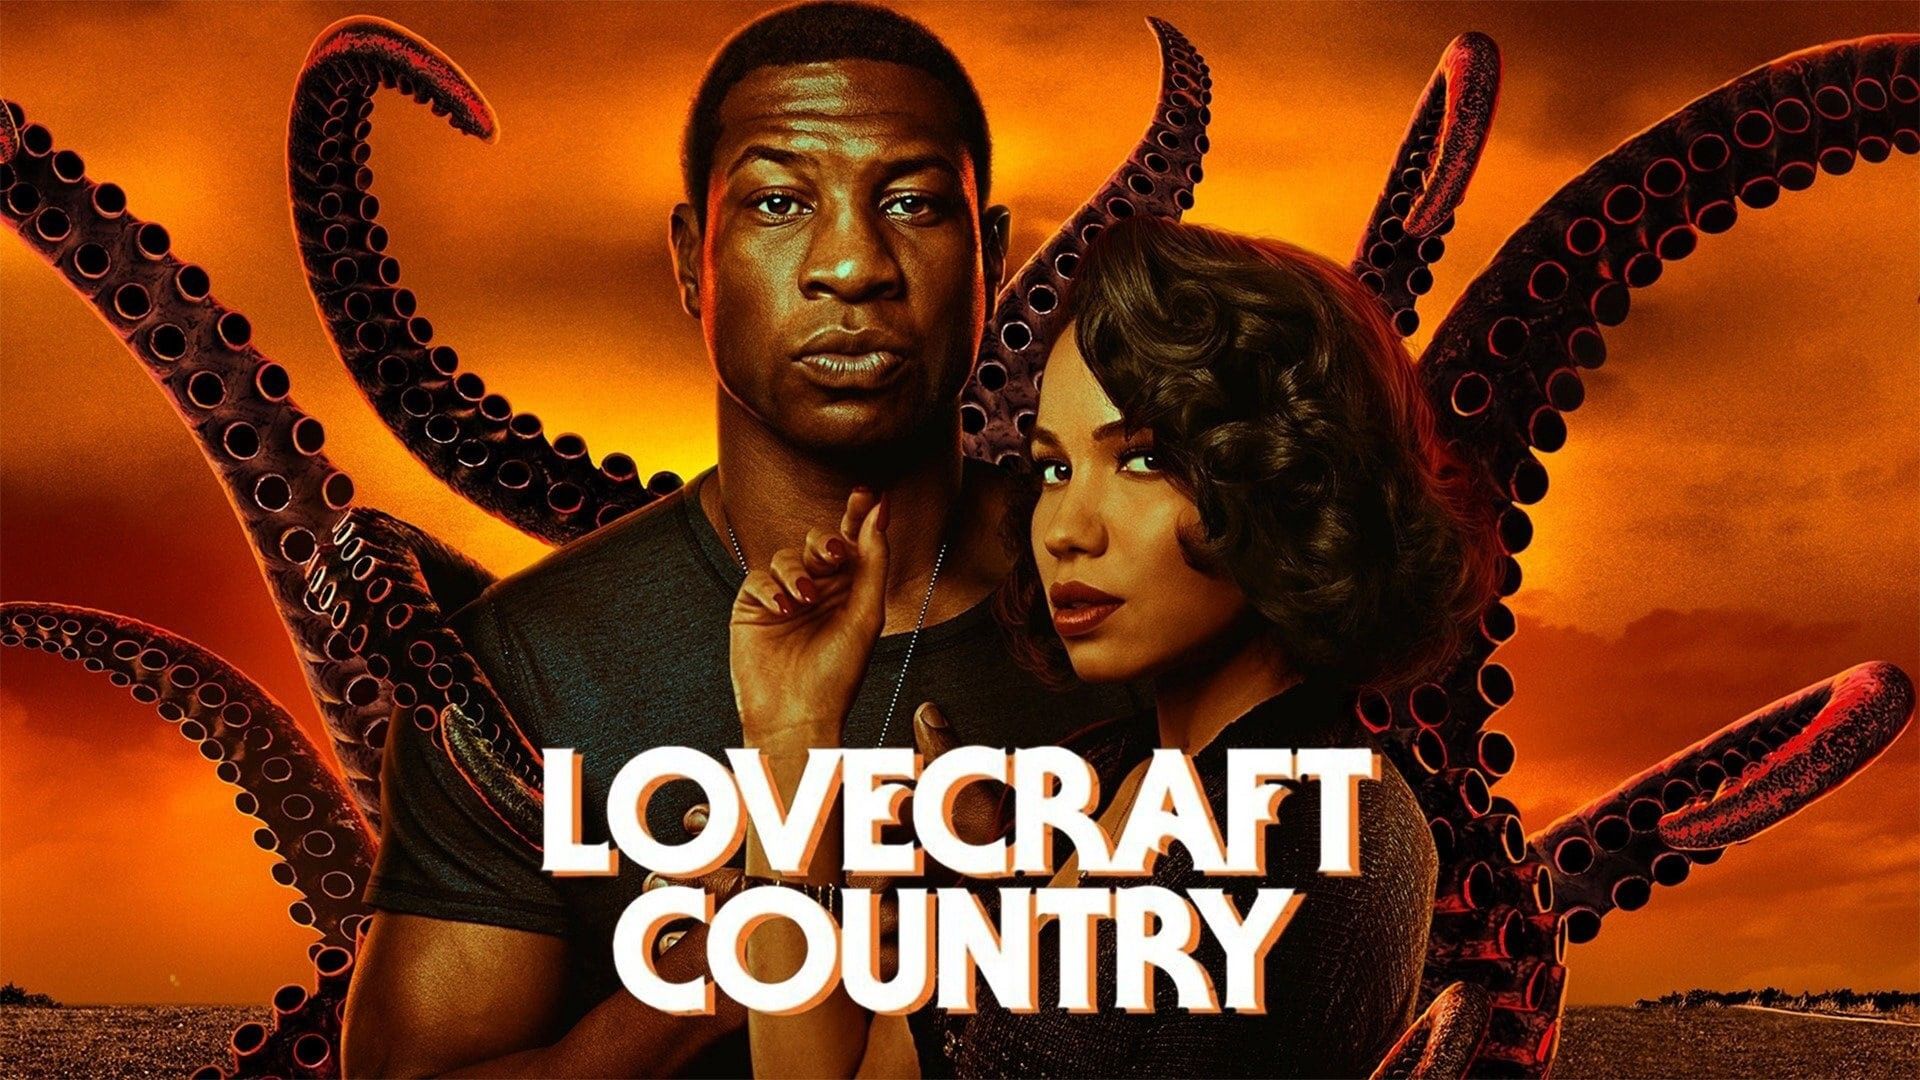 Lovecraft Country (2020) ★★★½